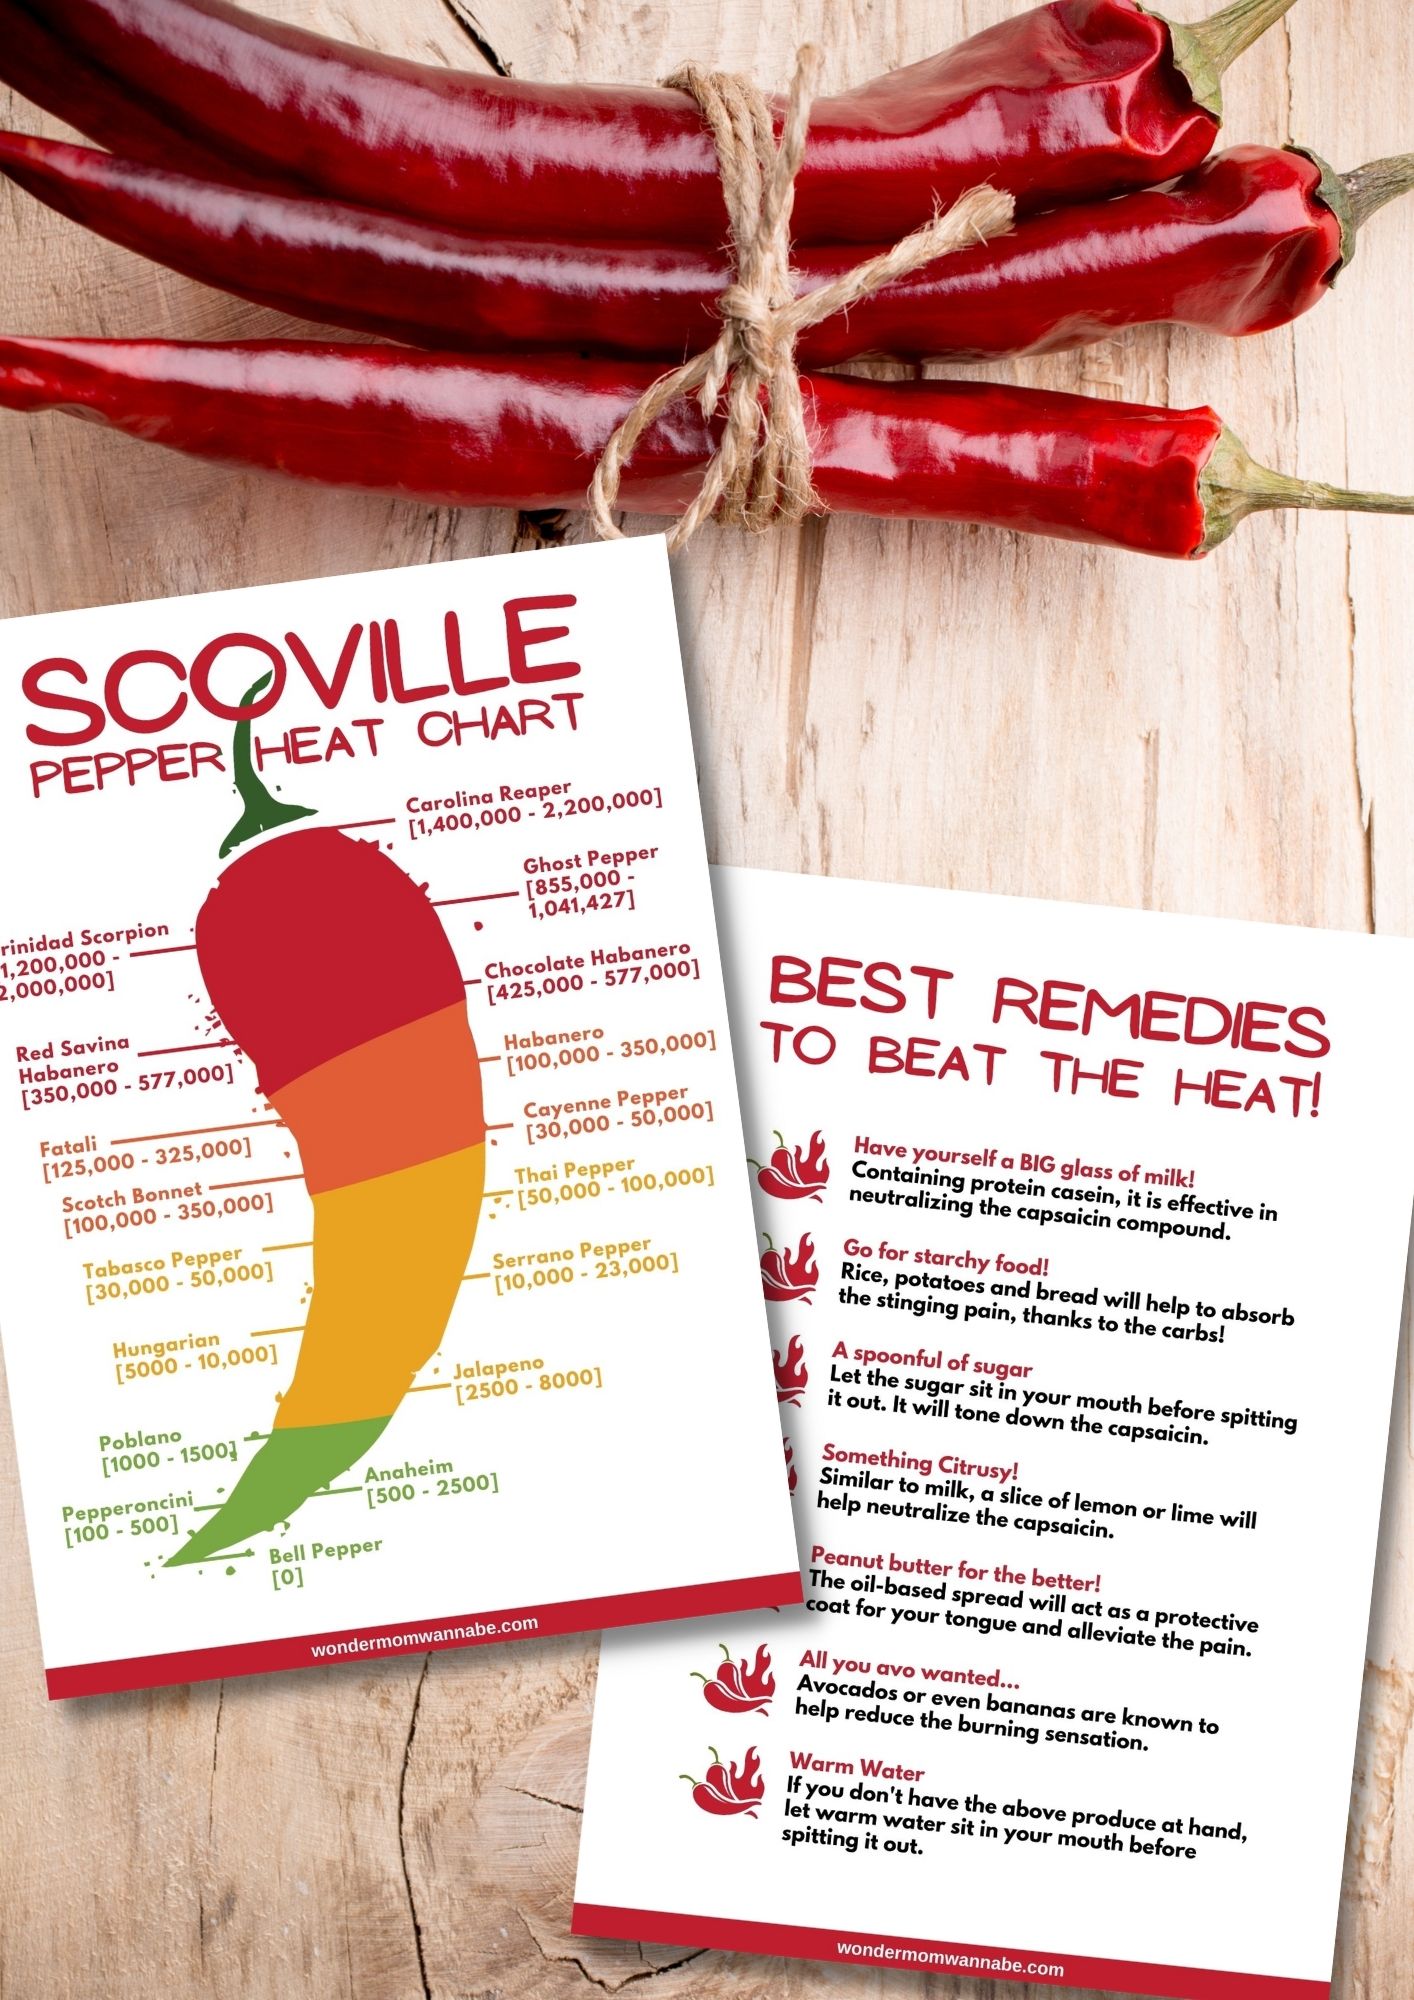 3 hot peppers, a printable Scoville Pepper Heat Chart and Best Remedies To Beat The Heat.